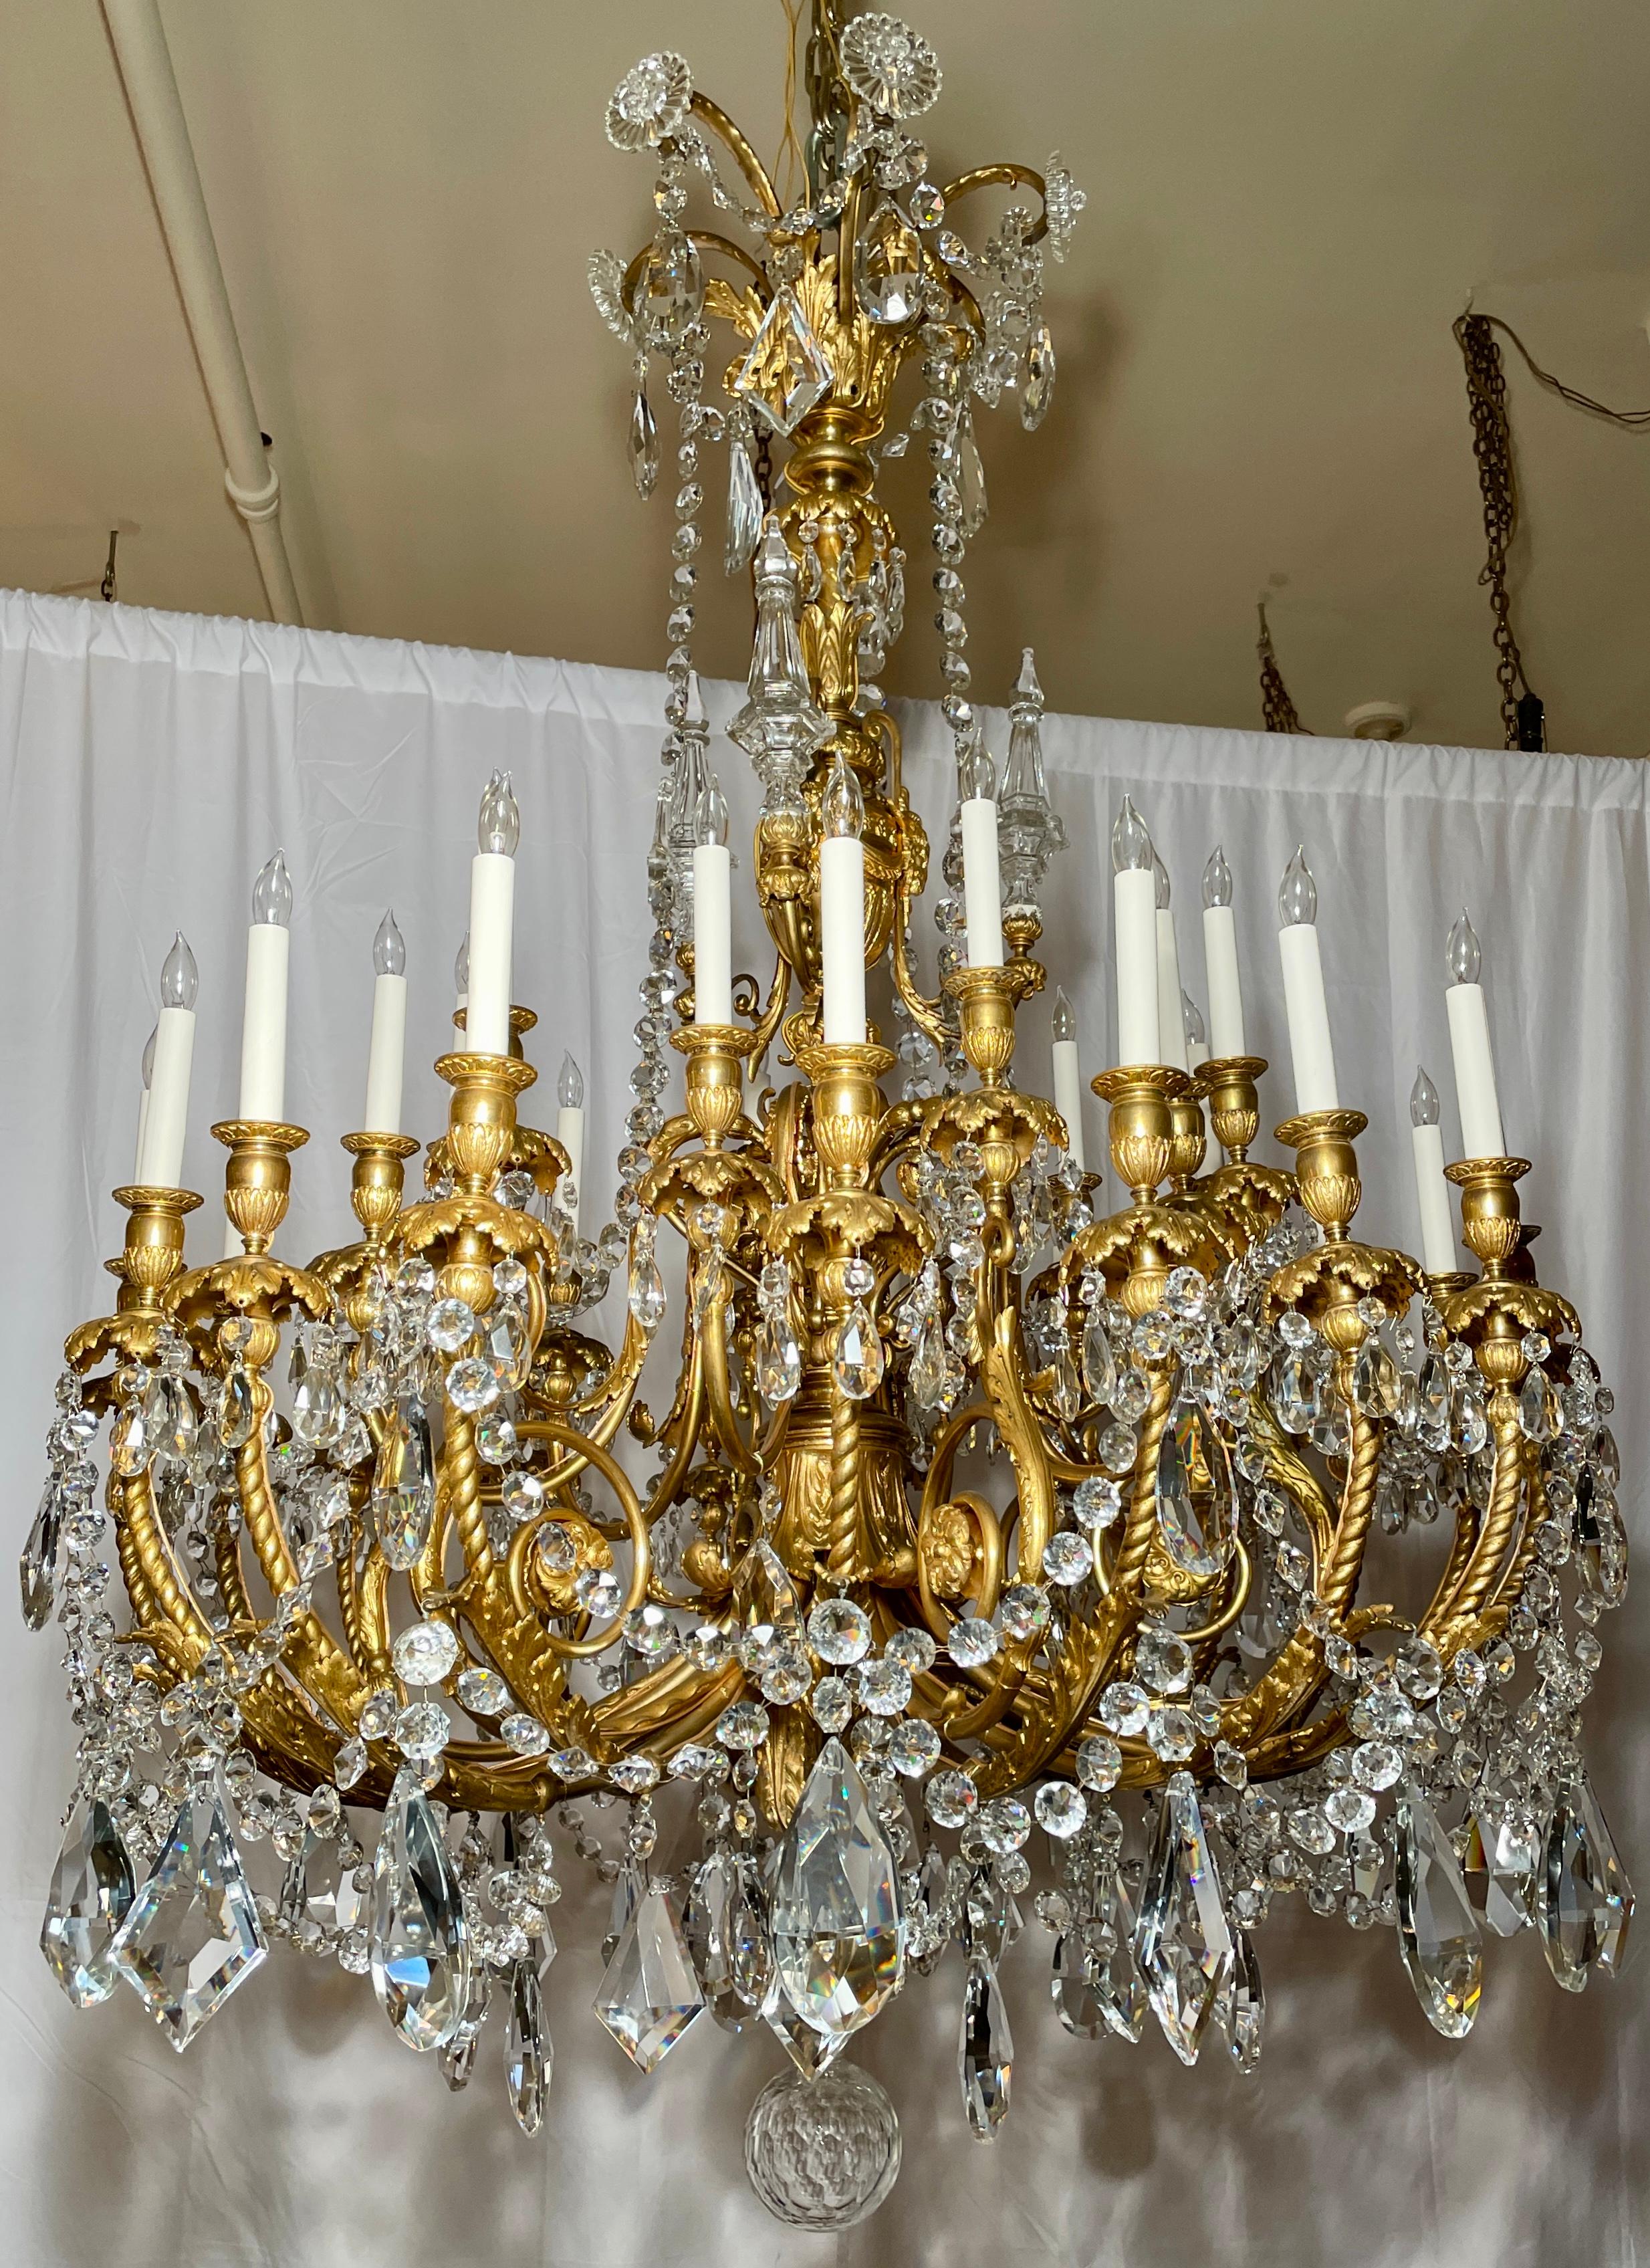 Magnificent Antique French Louis XVI bronze D' Ore and Baccarat crystal chandelier, circa 1865-1885.
Finest Gold Bronze and Baccarat Crystal